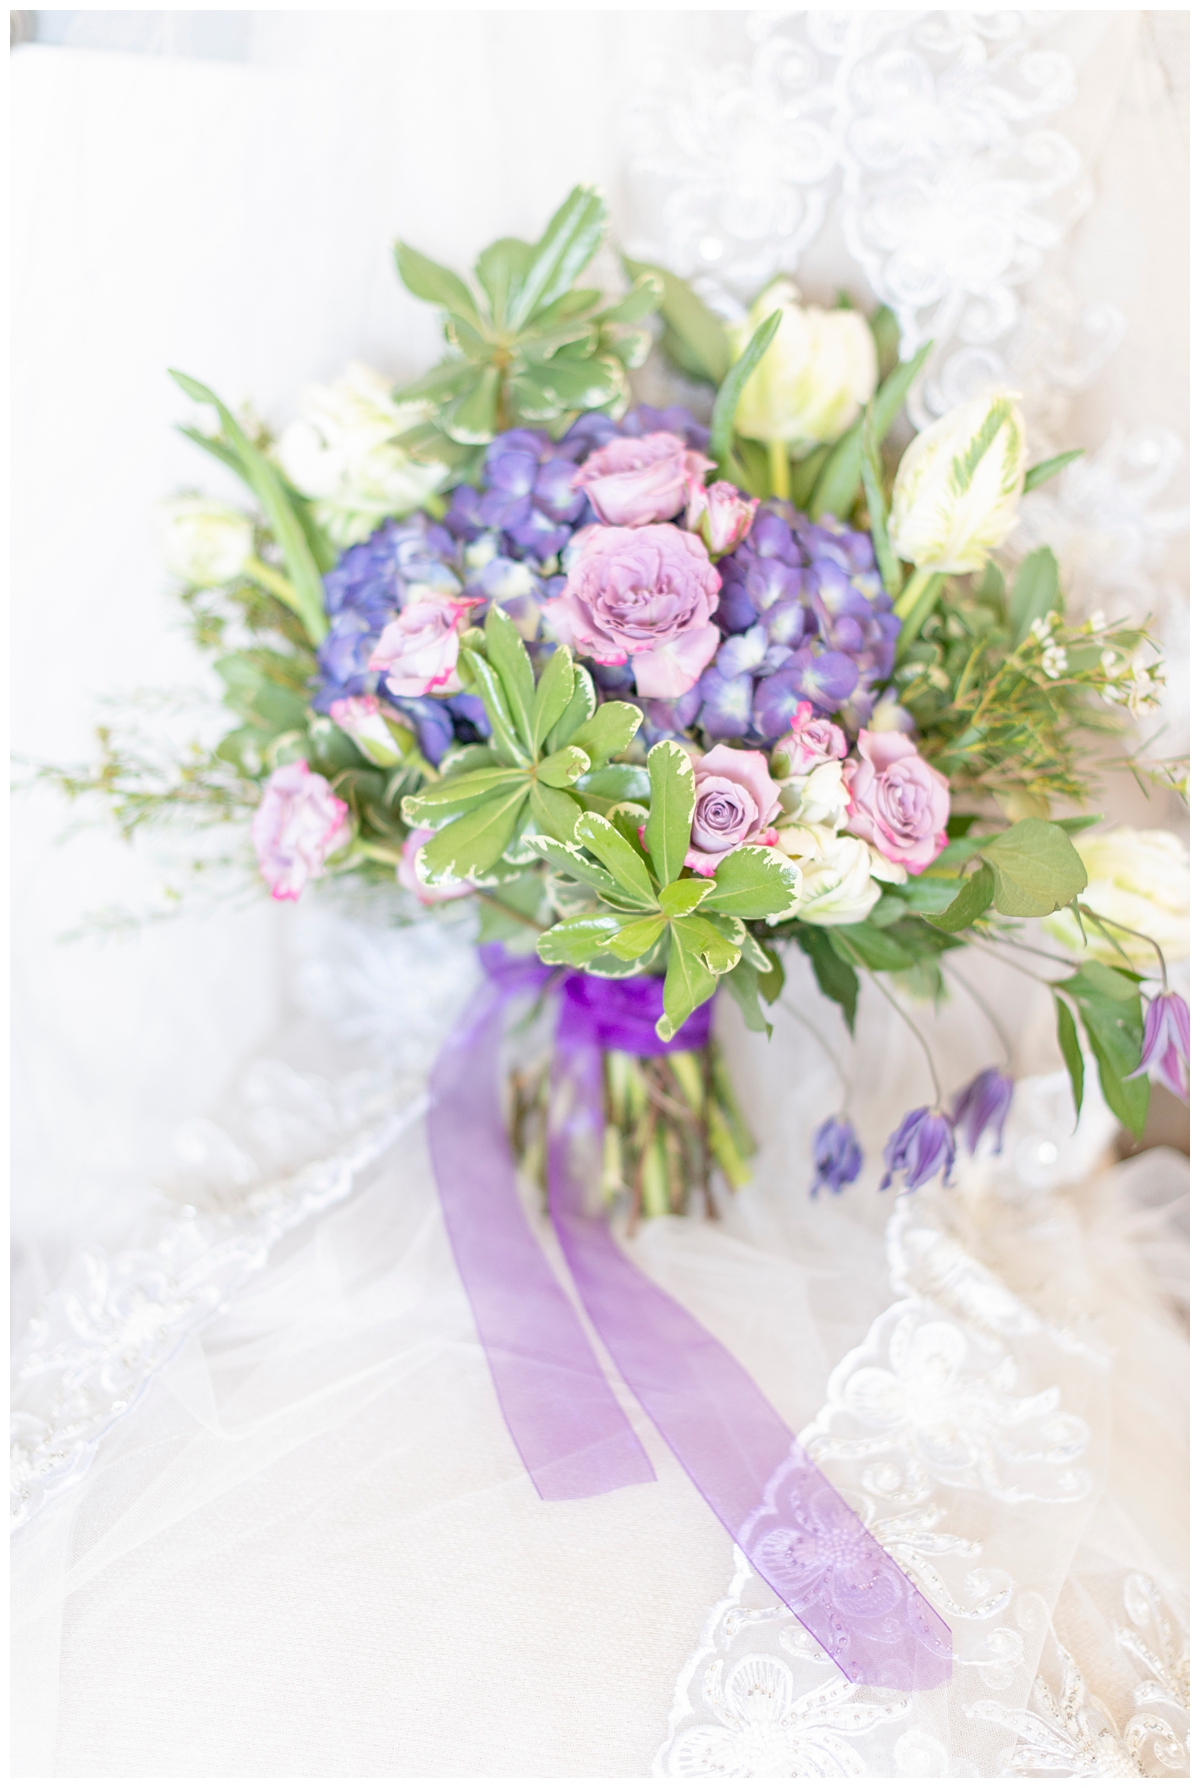 Tips for choosing your wedding flowers